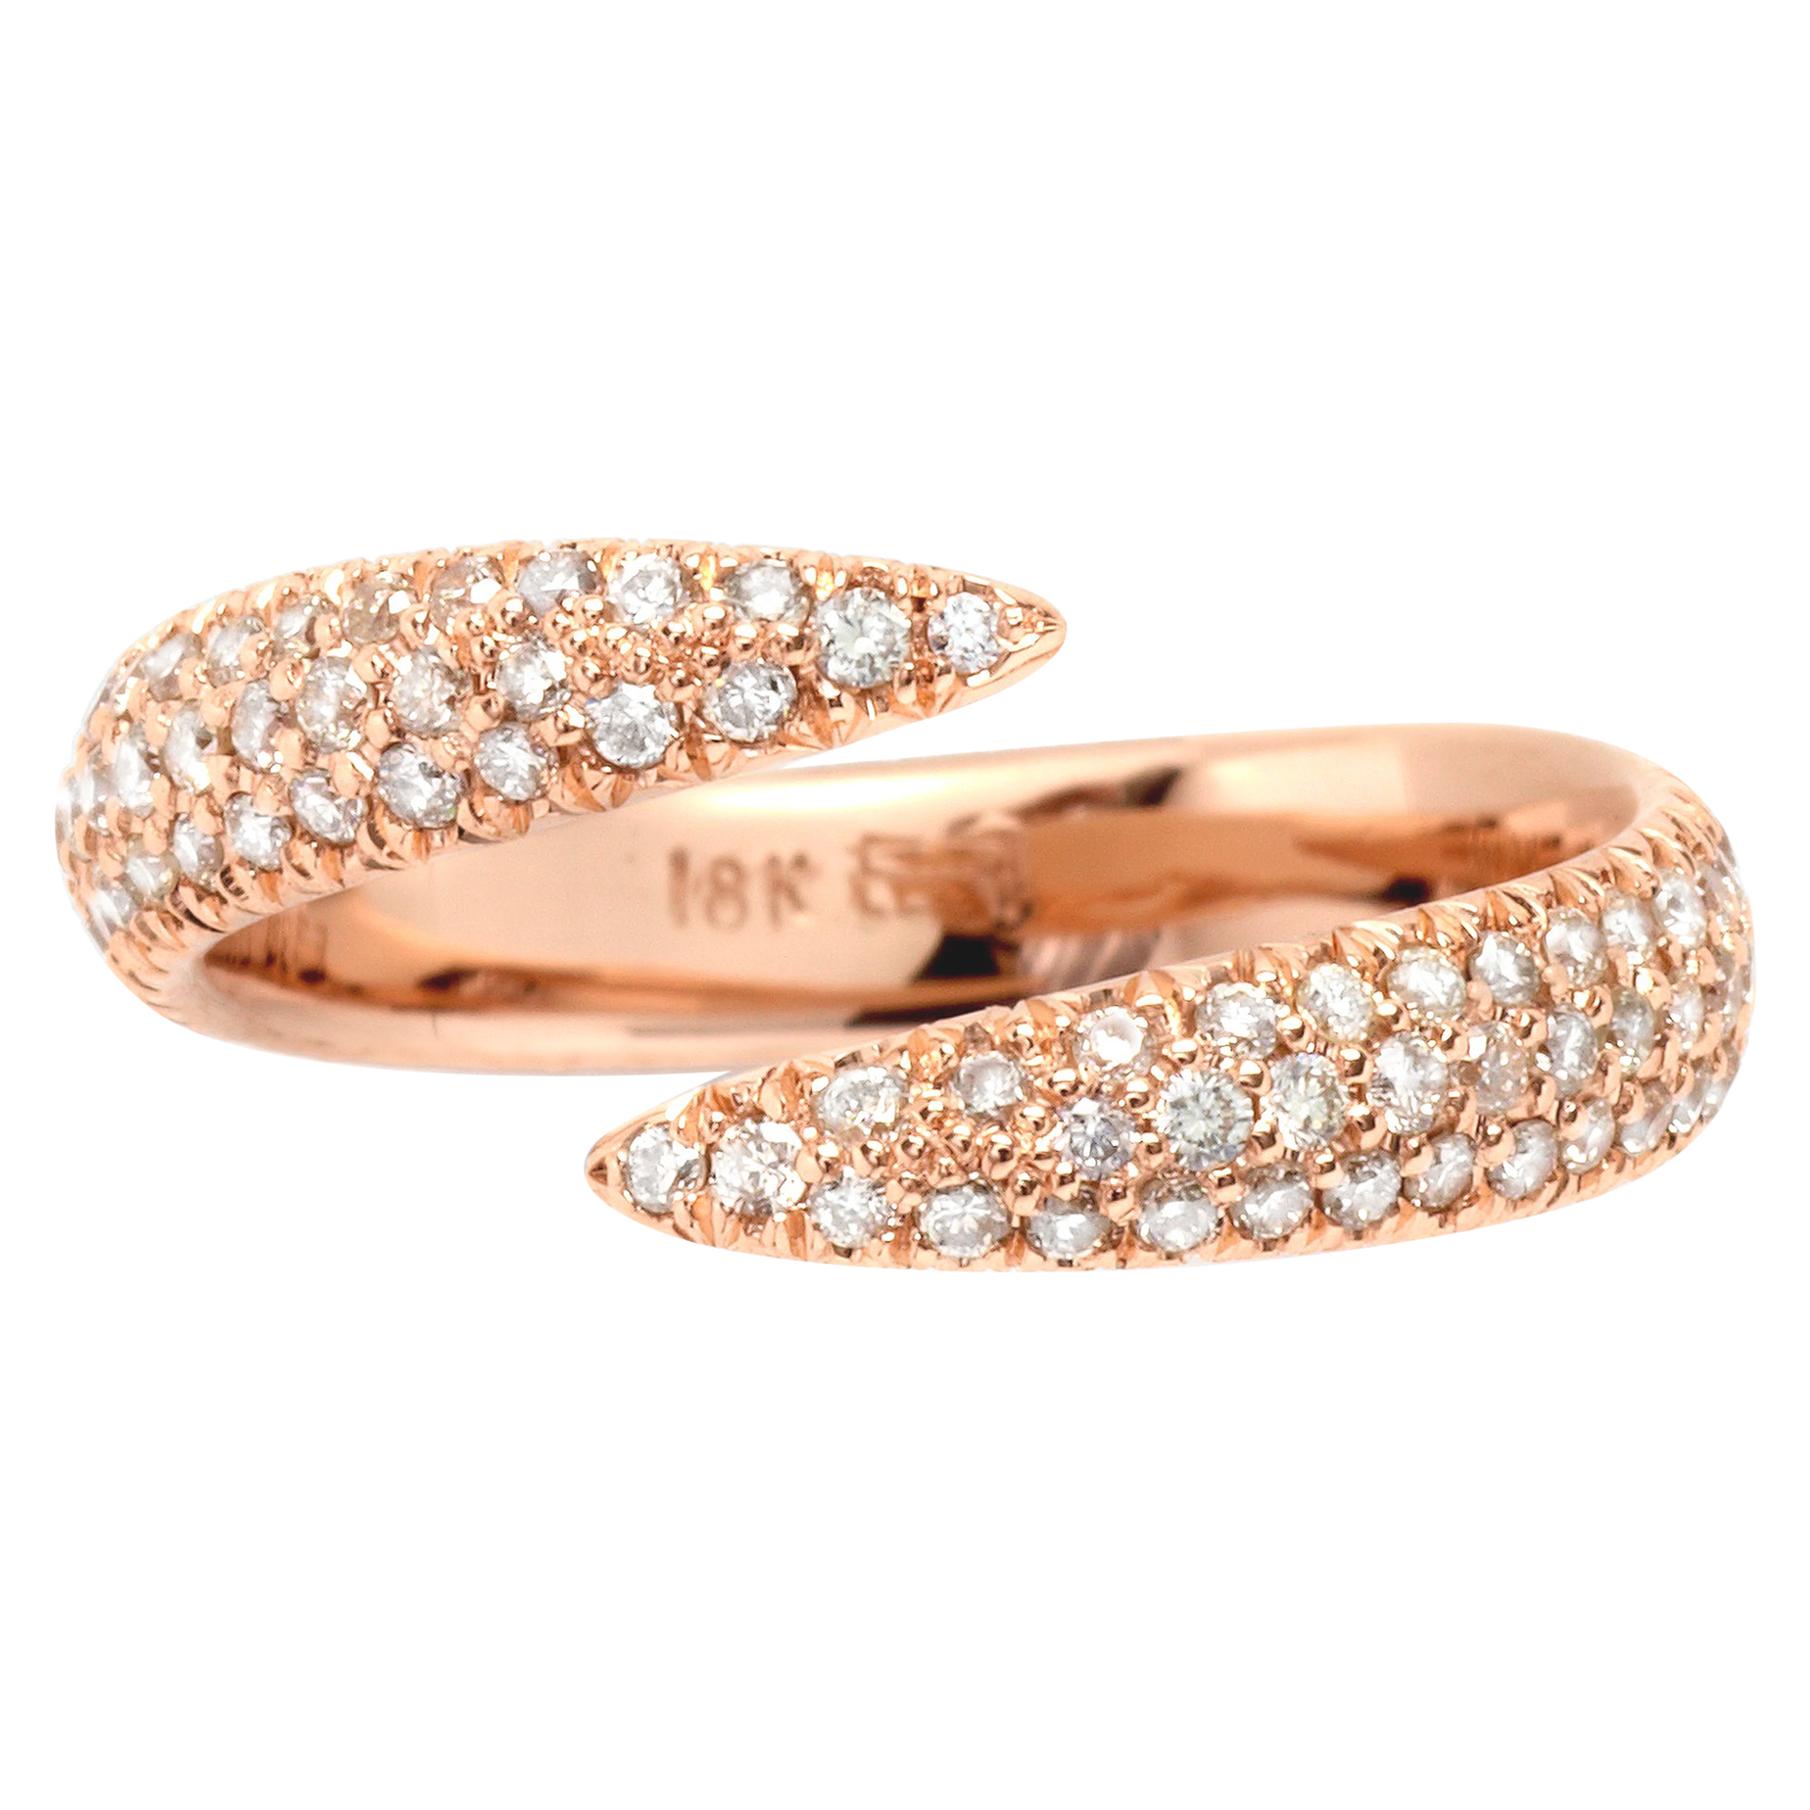 Eva Fehren Pave Wrap Claw Ring in 18 Karat Rose Gold Pale Champagne Diamonds For Sale